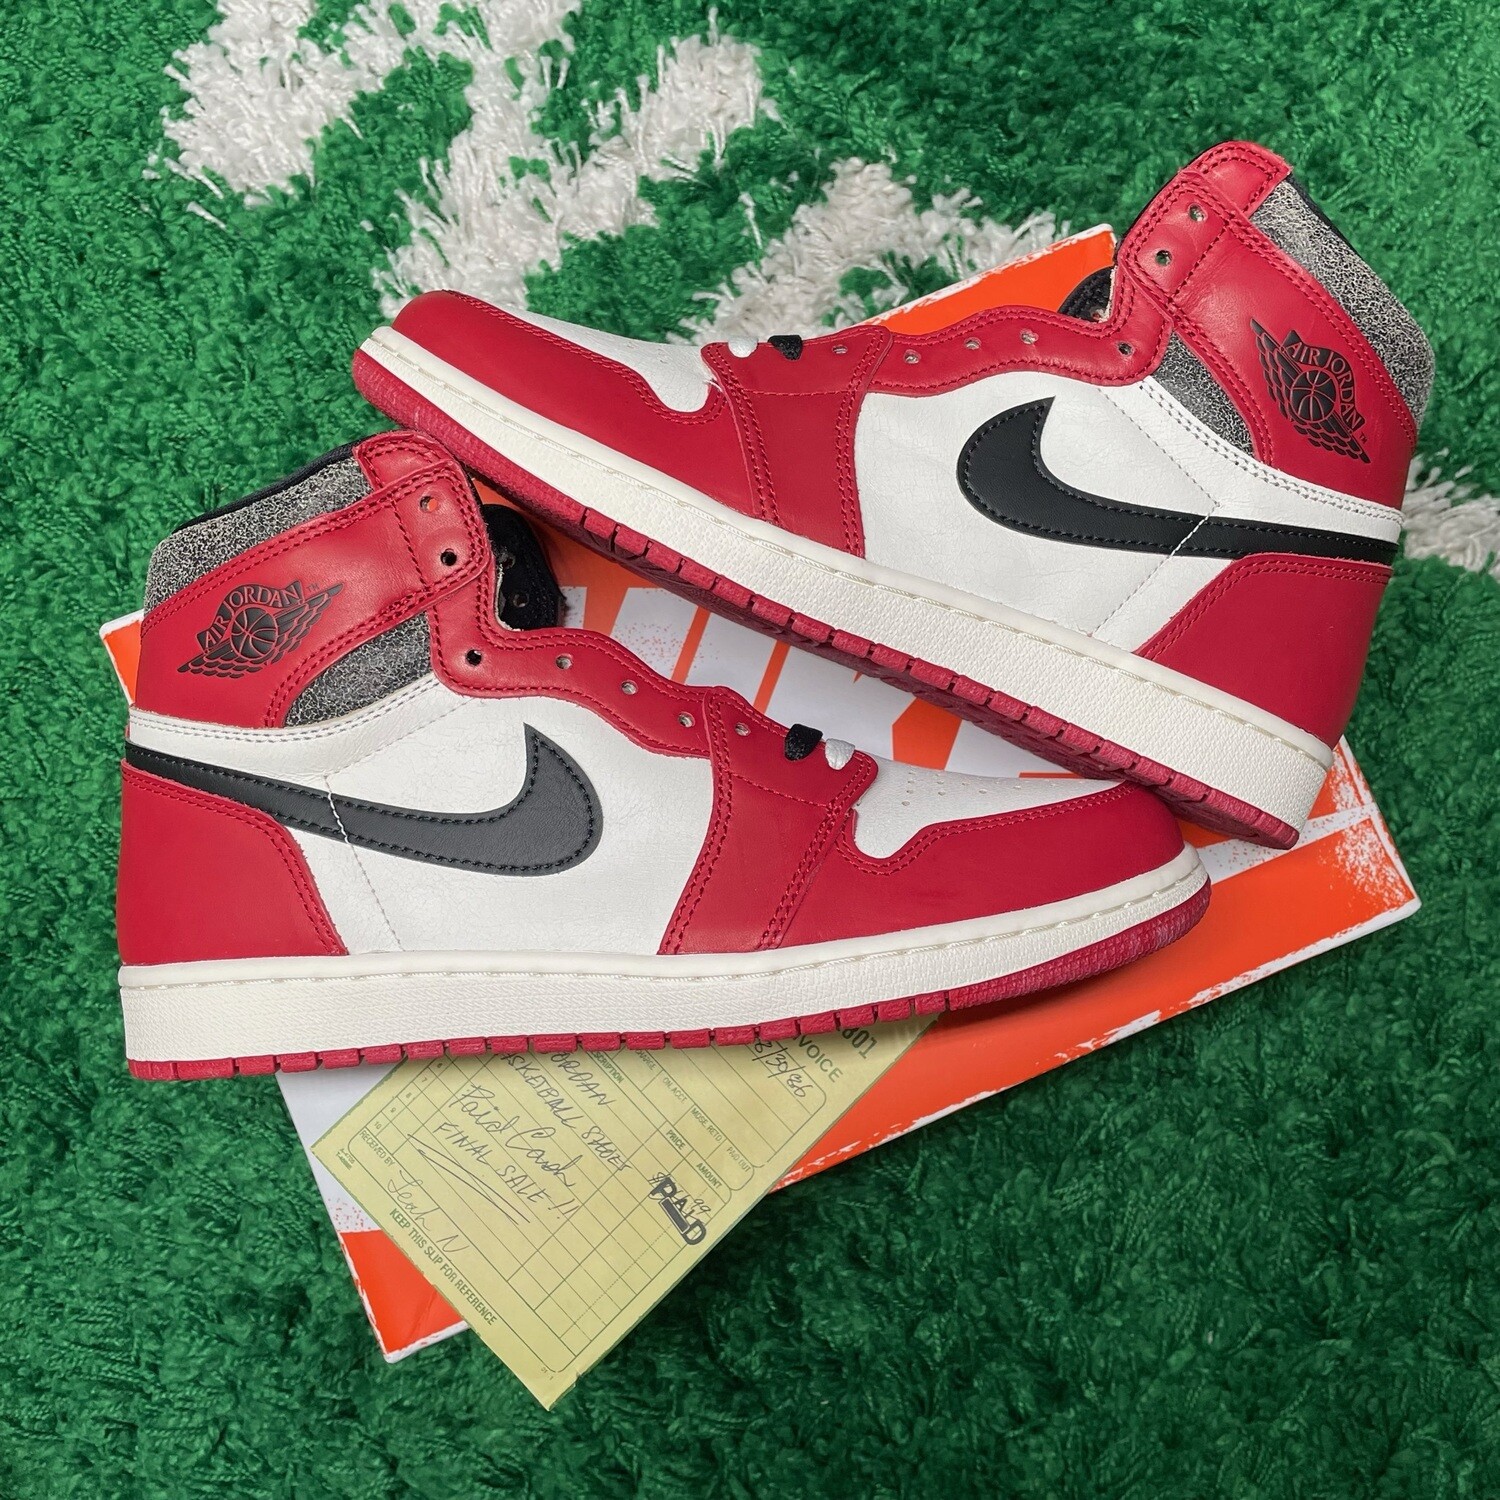 Jordan 1 Retro High OG Chicago Lost and Found Size 11.5M/13W